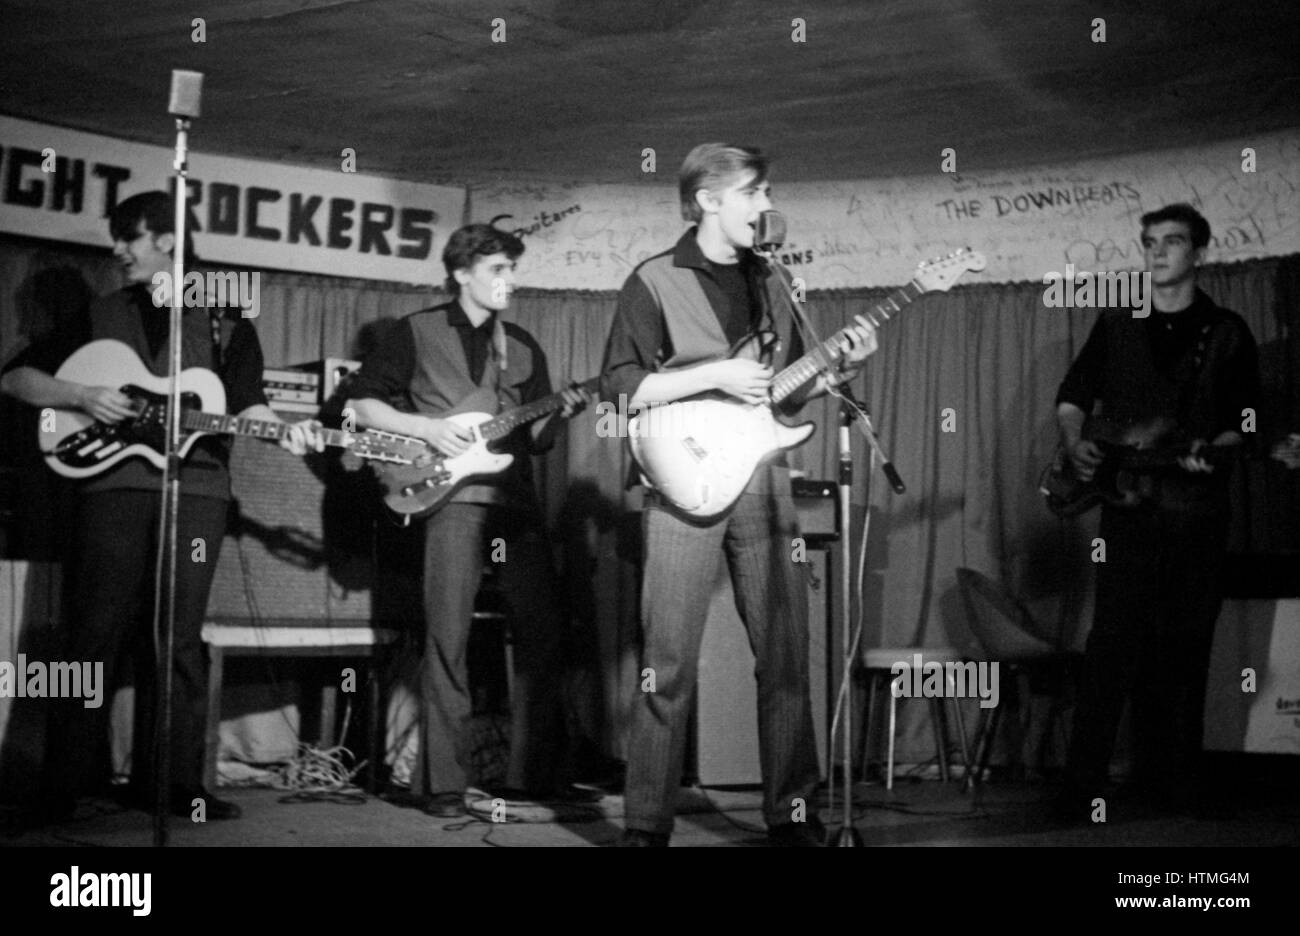 Belgian rock band Les Night Rockers performing at the Golf-Drouot in Paris in 1964. With: Armand Massaux, Robert Hesbois, Freddy Maillard and Gérard Boone. Stock Photo